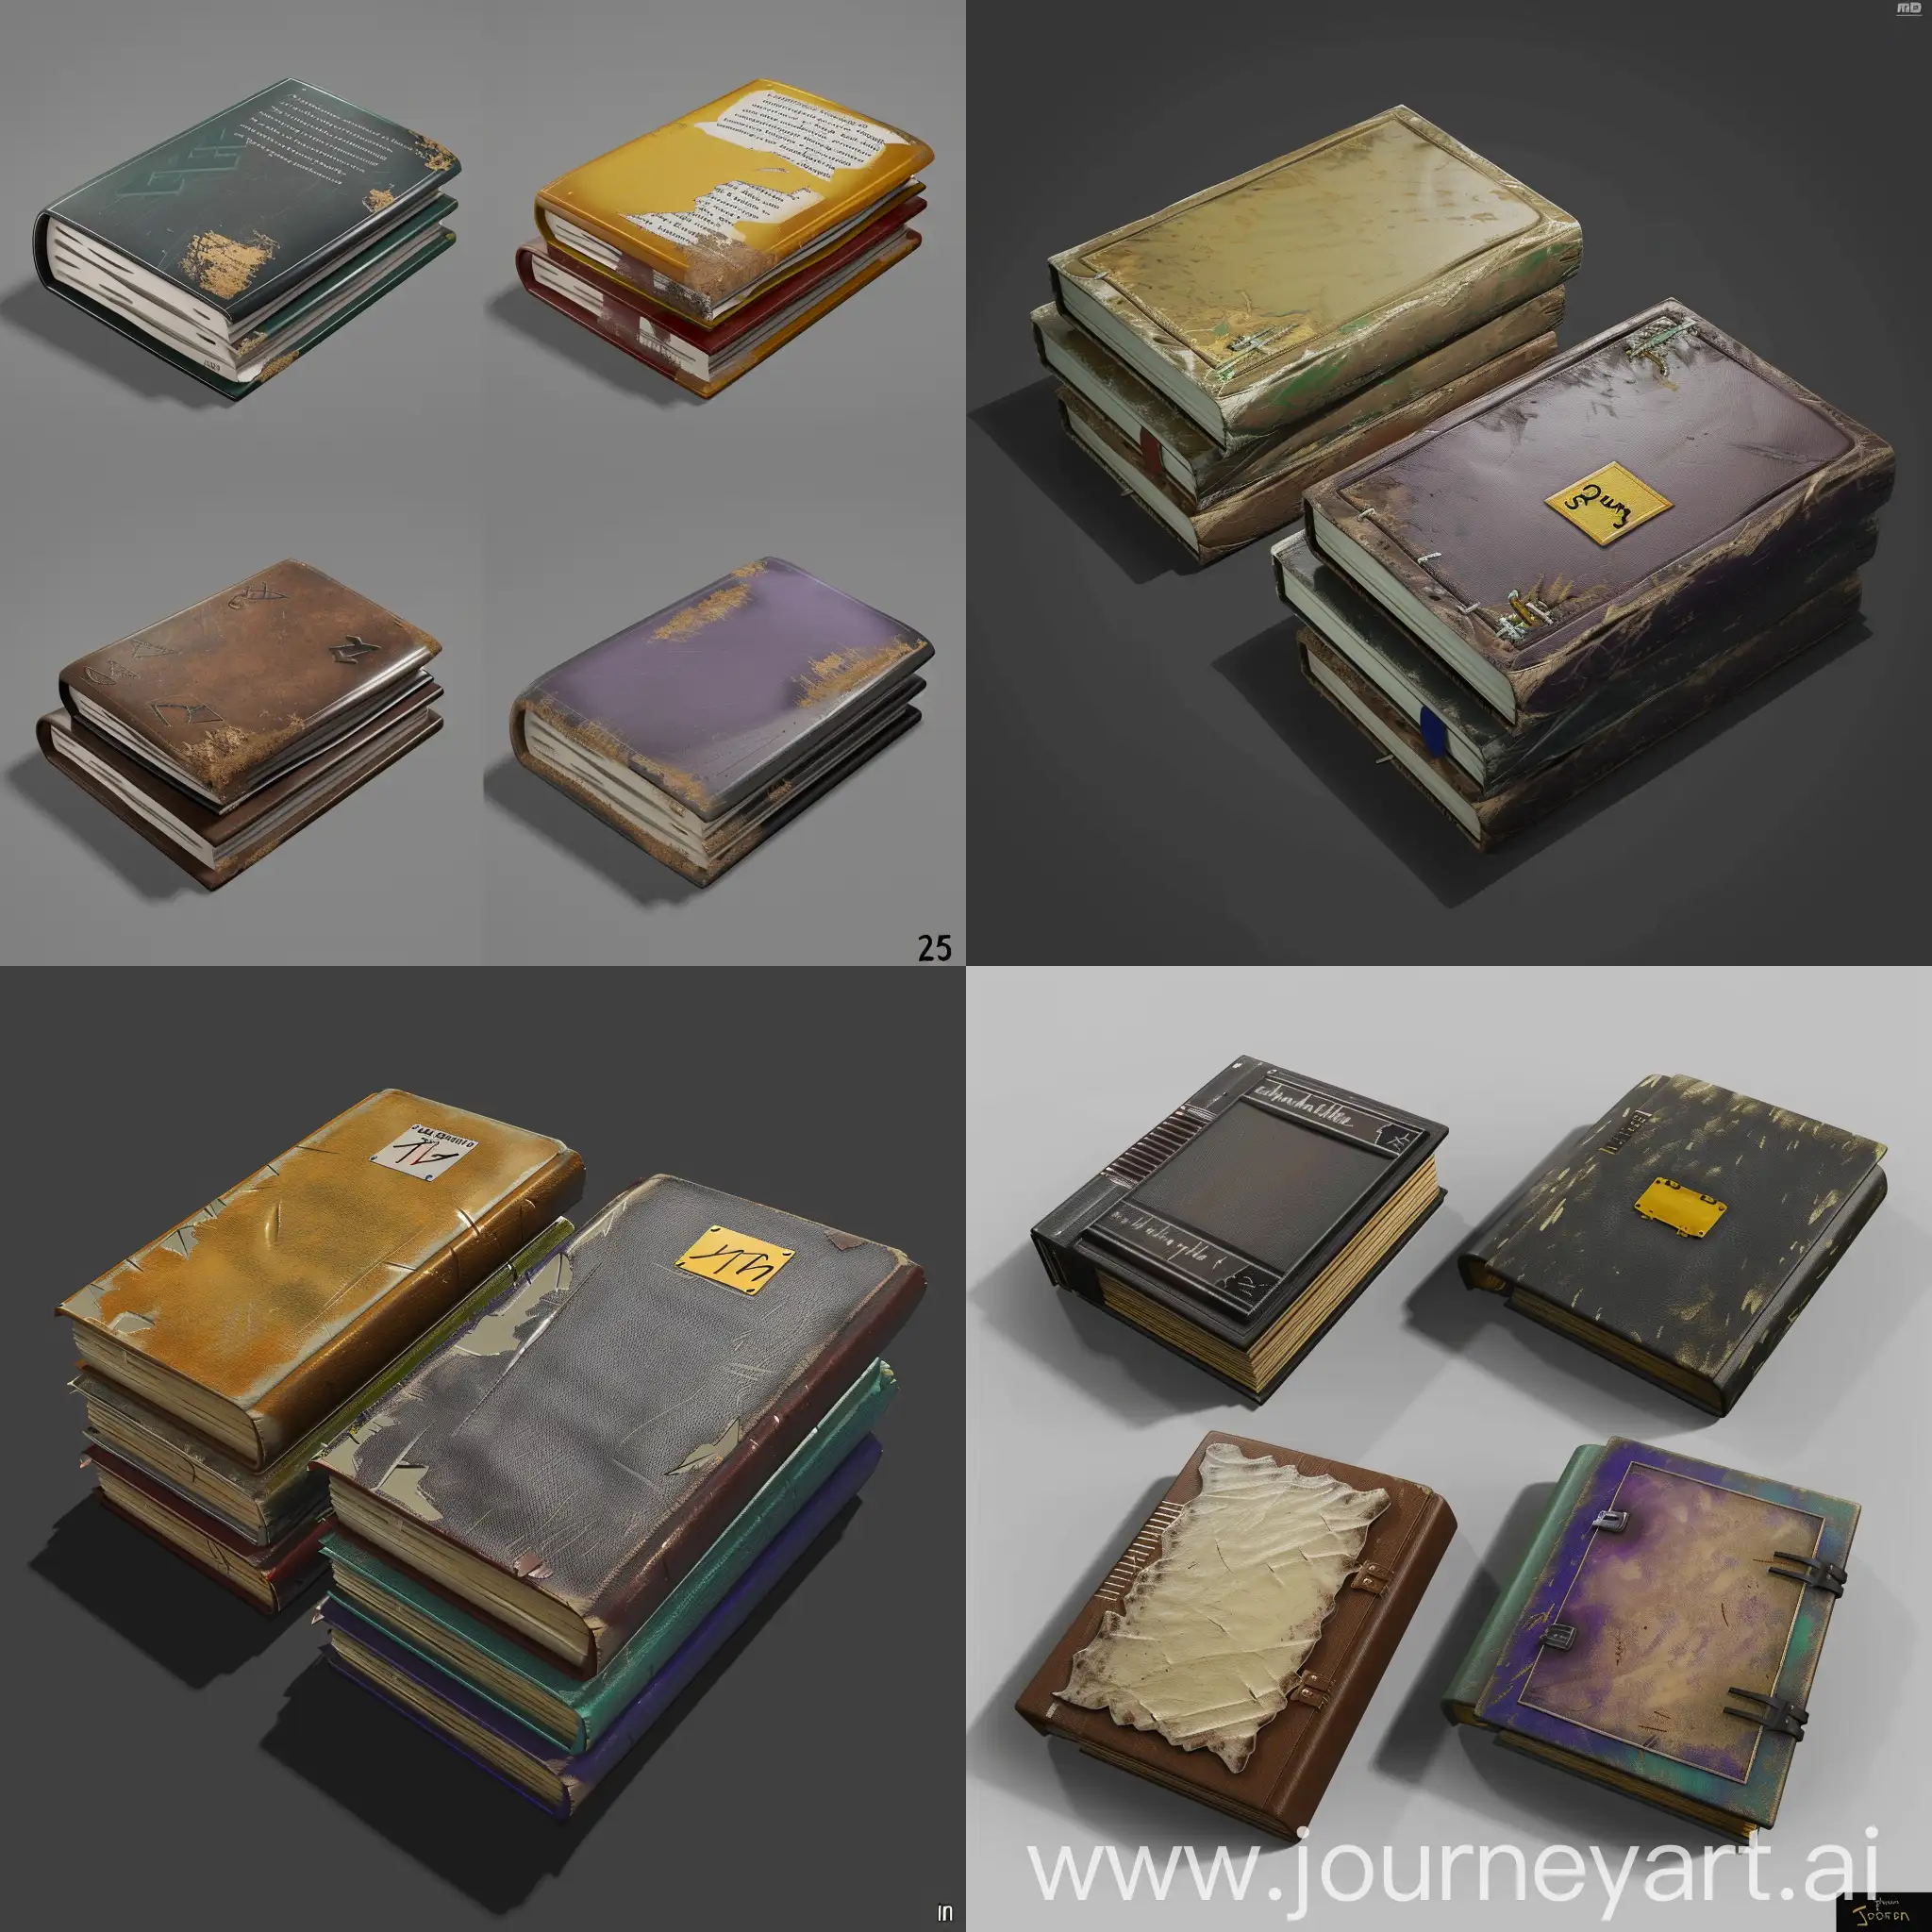 Old-Worn-Leather-Books-Stack-in-Realistic-3D-Blender-Style